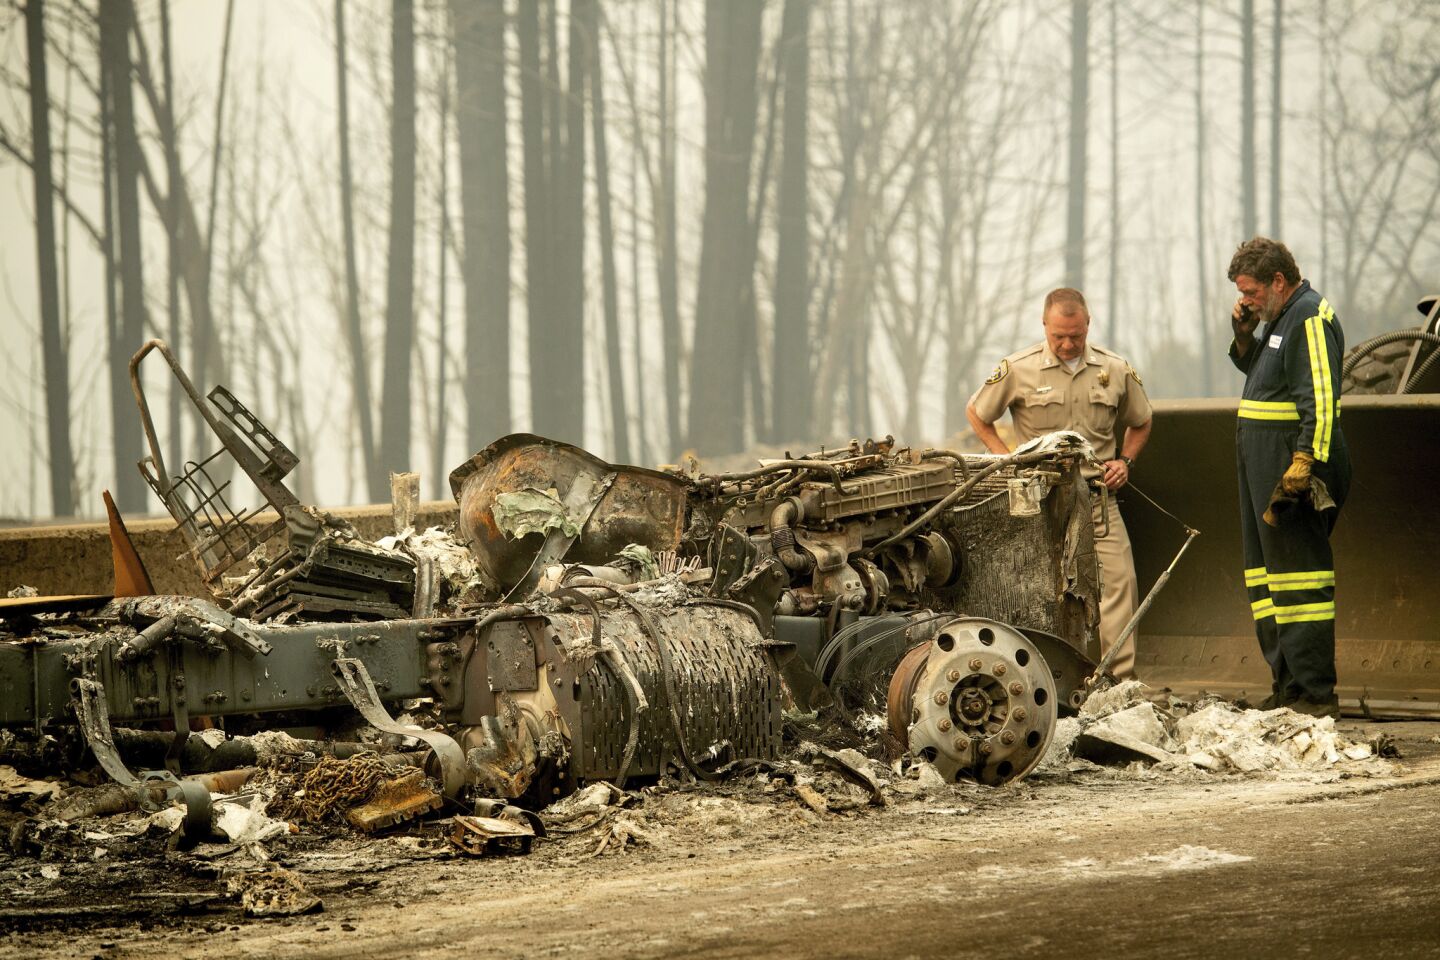 California Highway Patrol Capt. Mark Loveless examines a truck scorched by the Delta fire burning along Interstate 5 in the Shasta-Trinity National Forest.